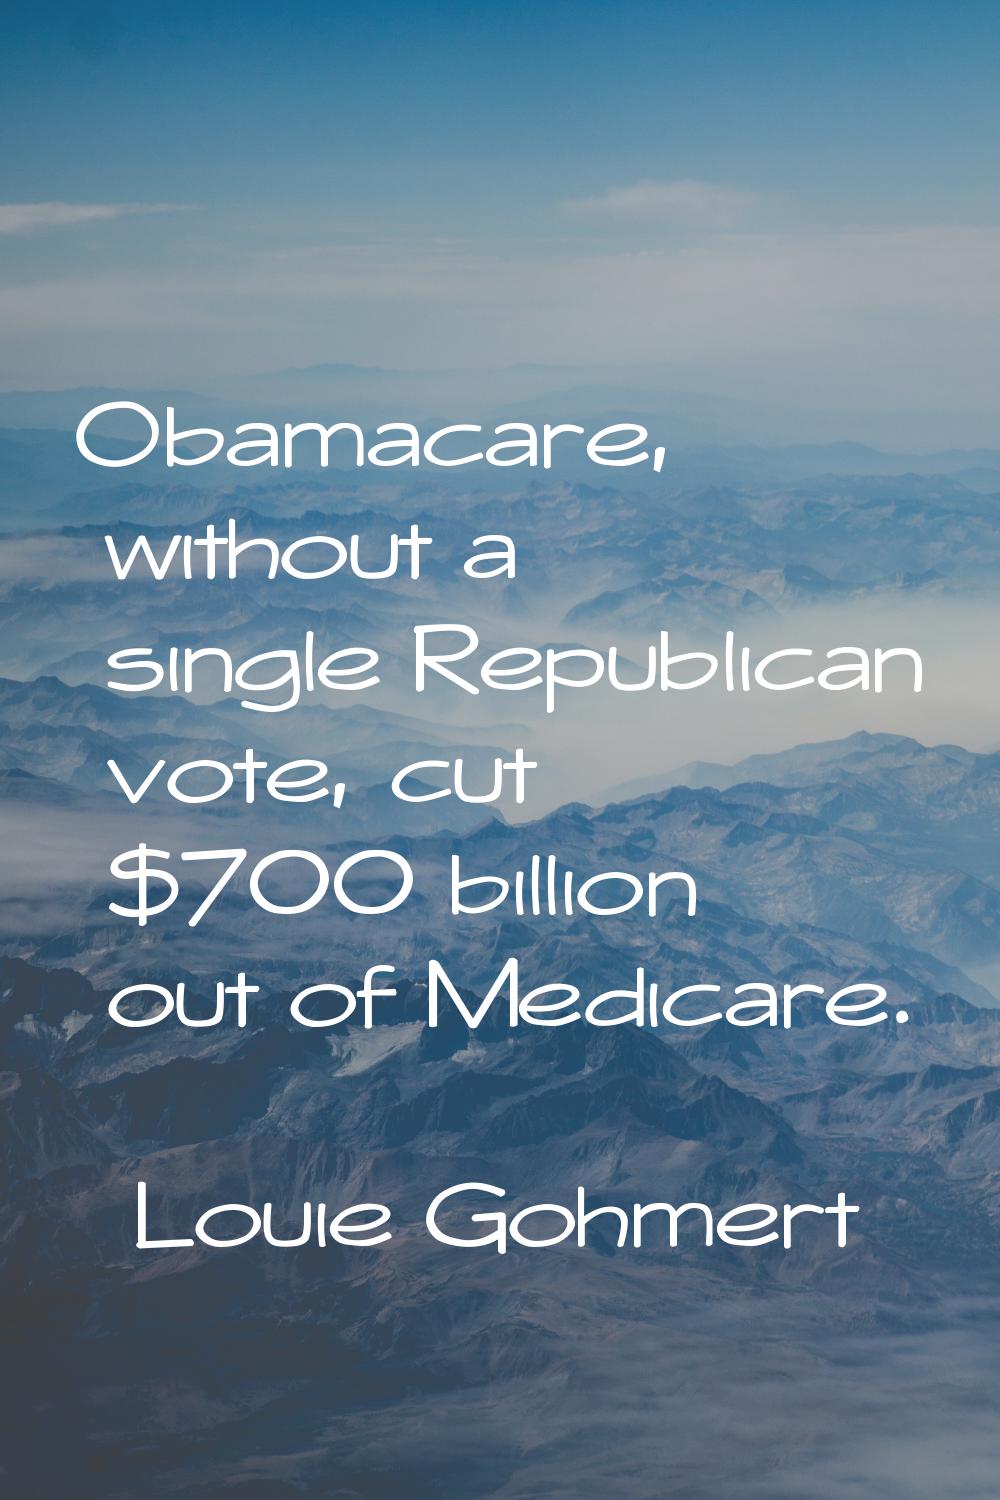 Obamacare, without a single Republican vote, cut $700 billion out of Medicare.